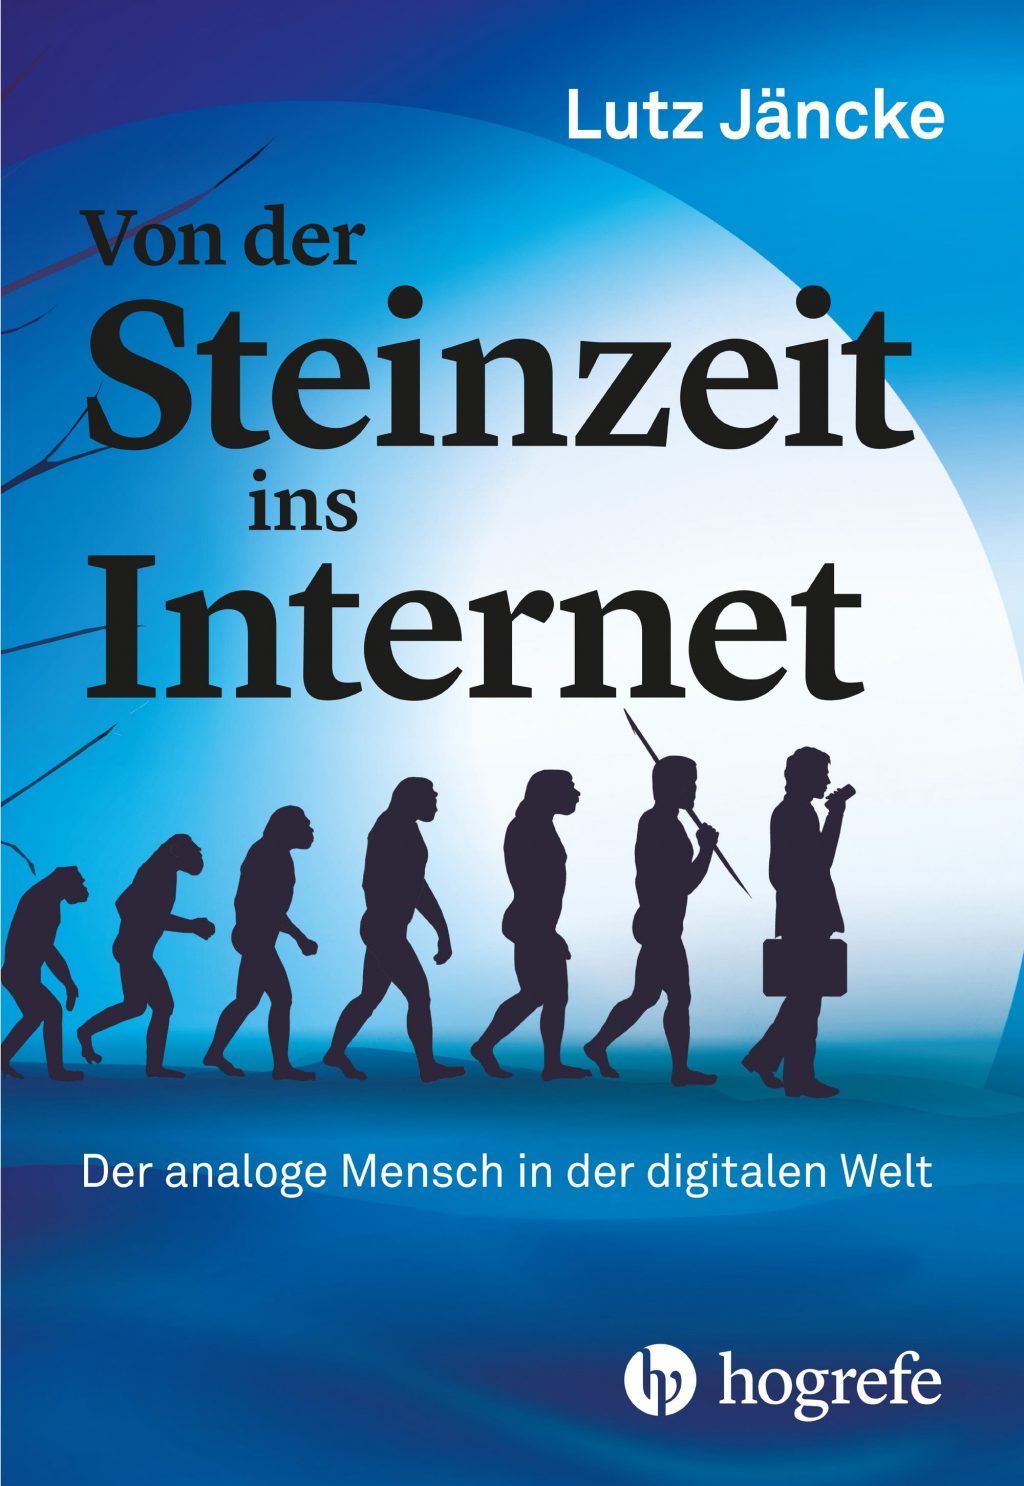 Book review "From the Stone Age to the Internet"